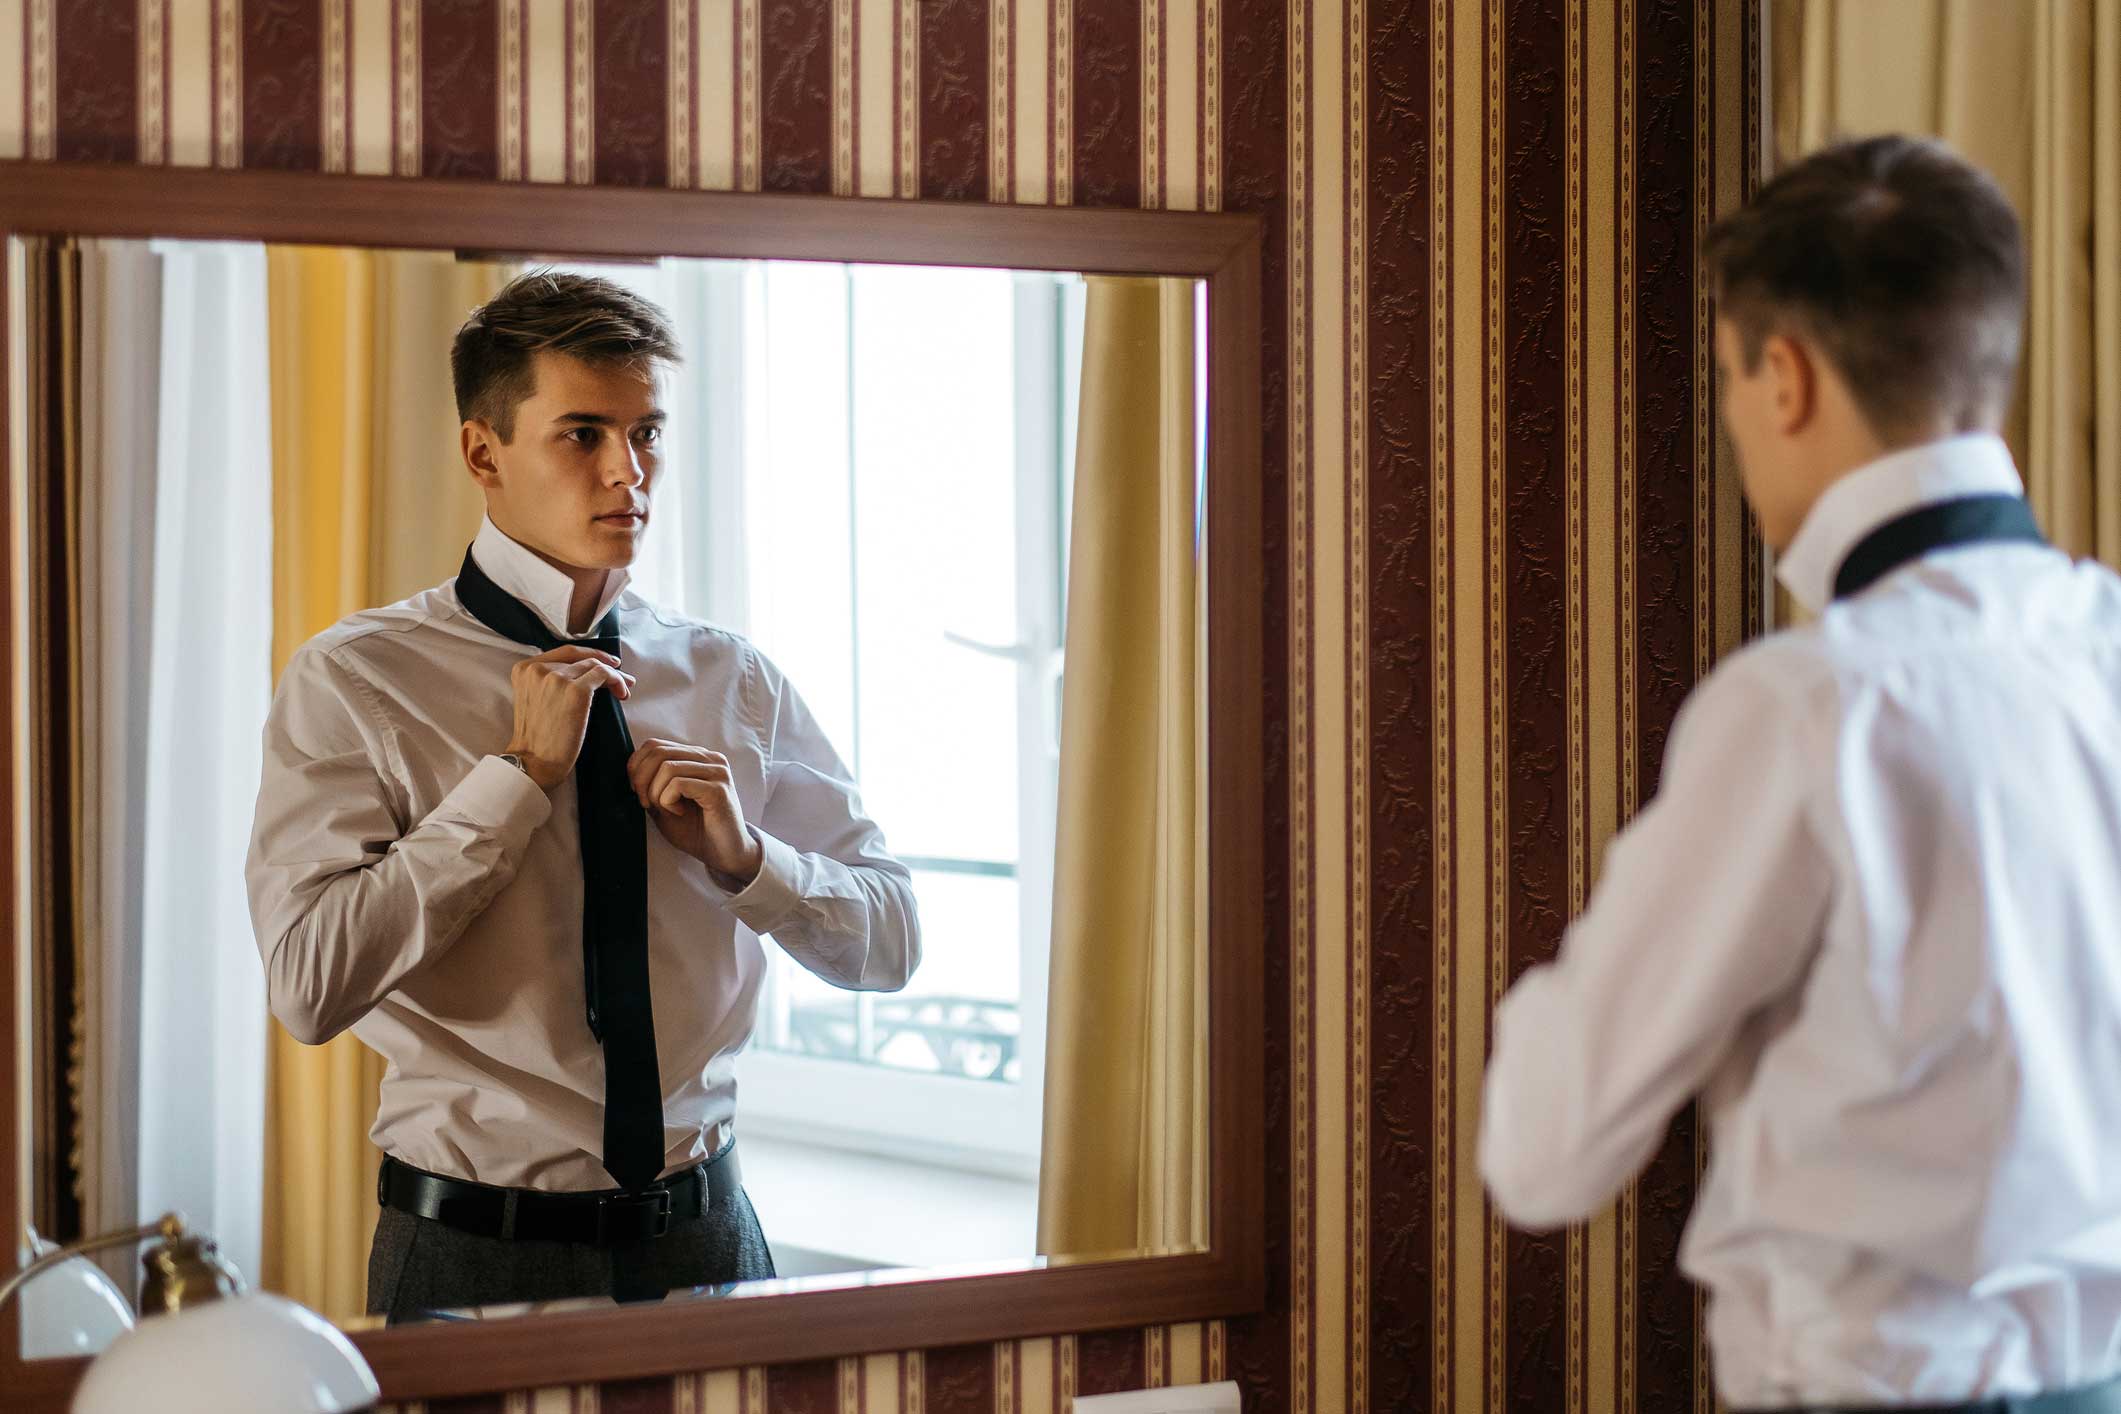 A young man tying his tie over his shirt in a mirror